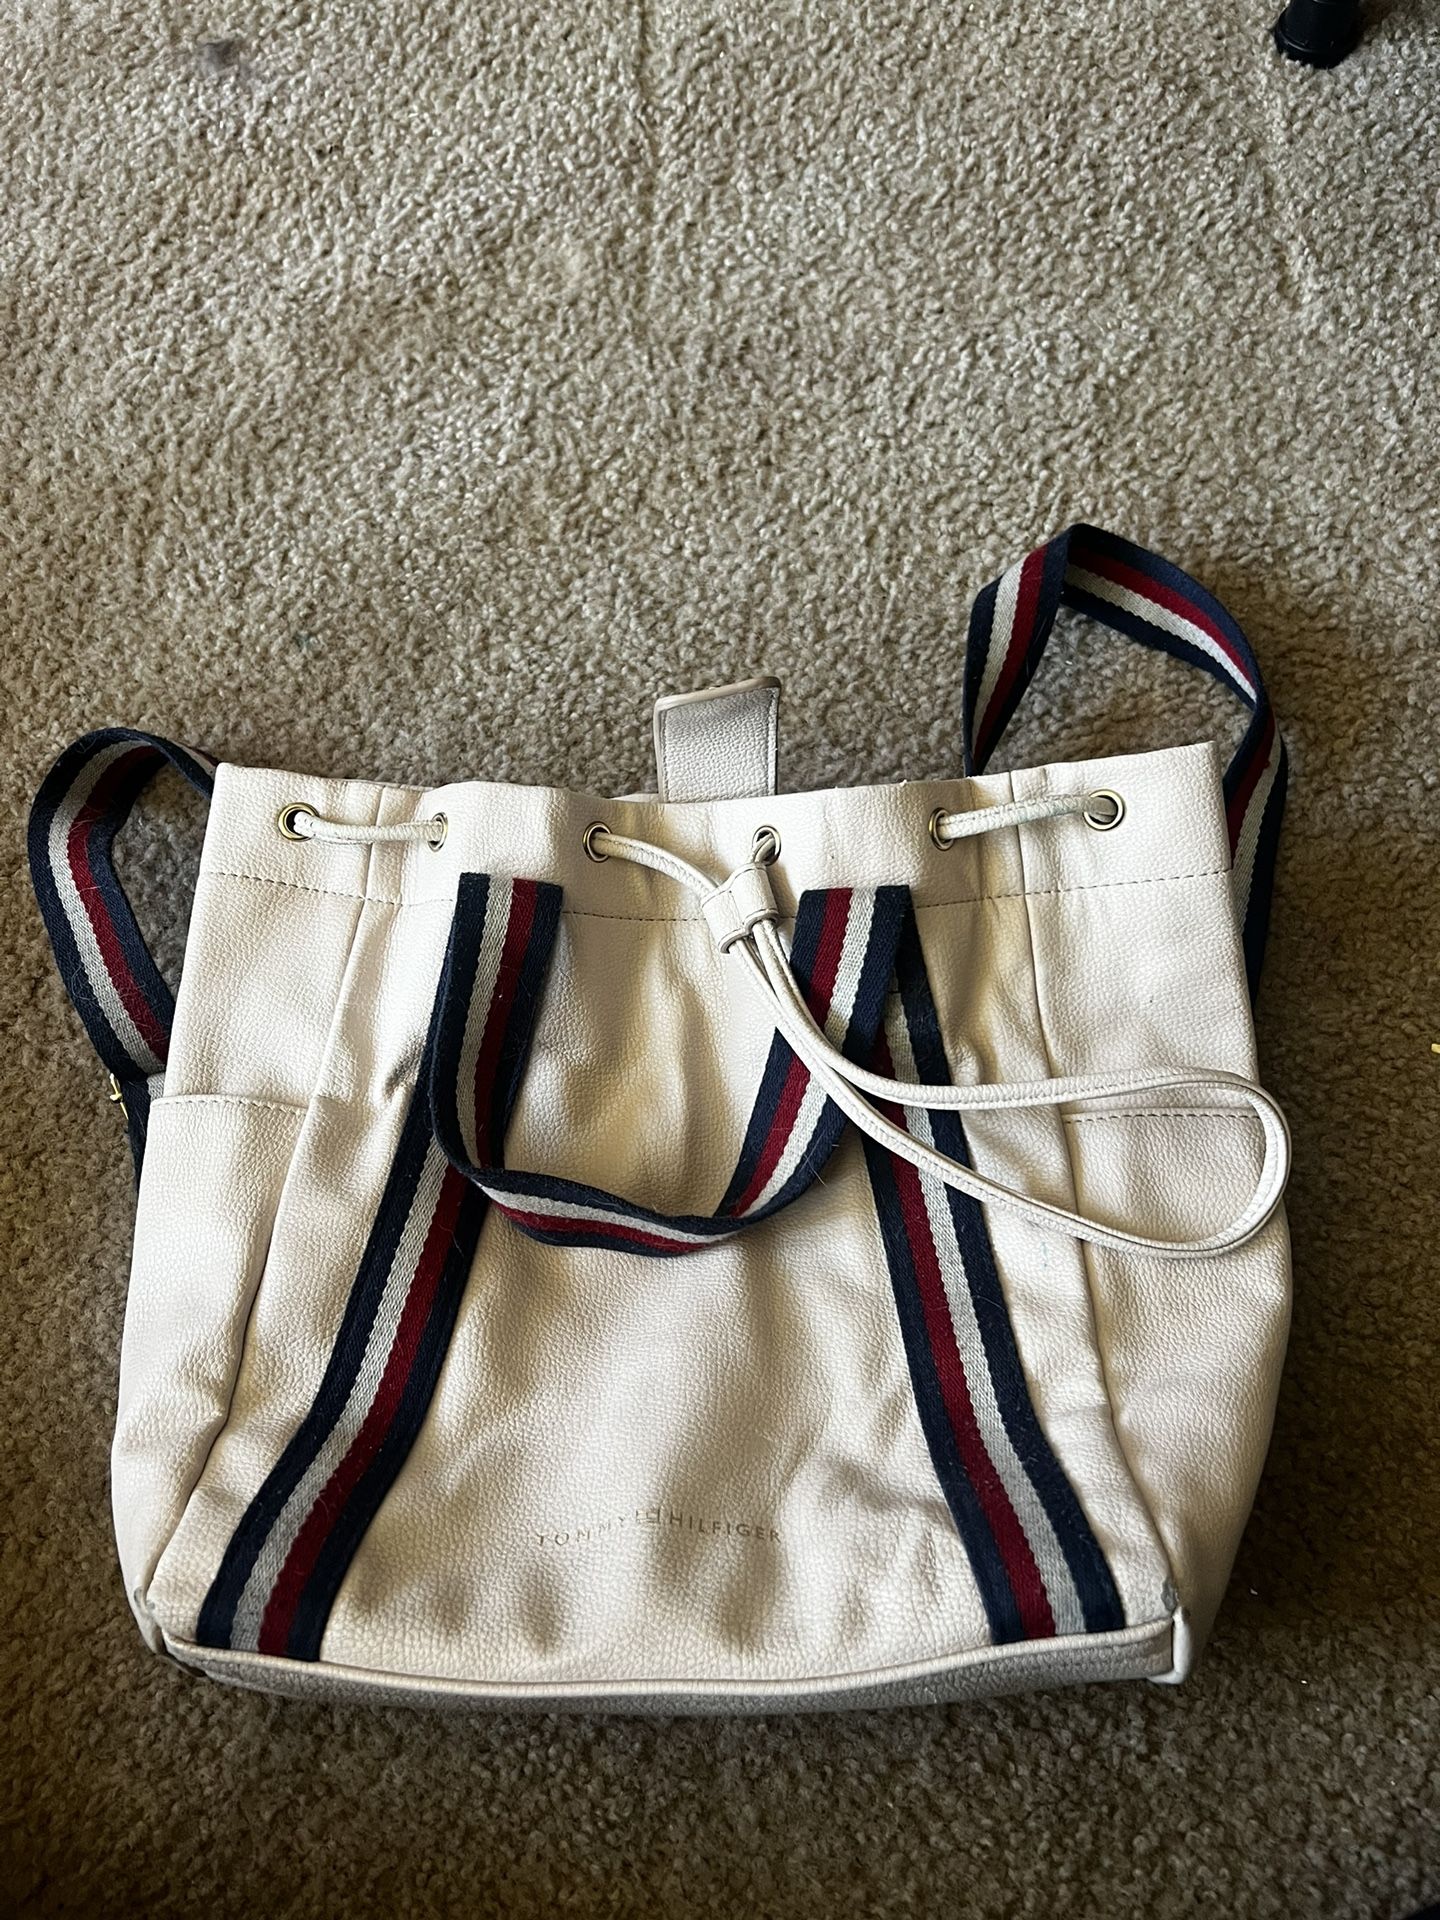 Tommy Hilfiger Cream Purse/backpack 